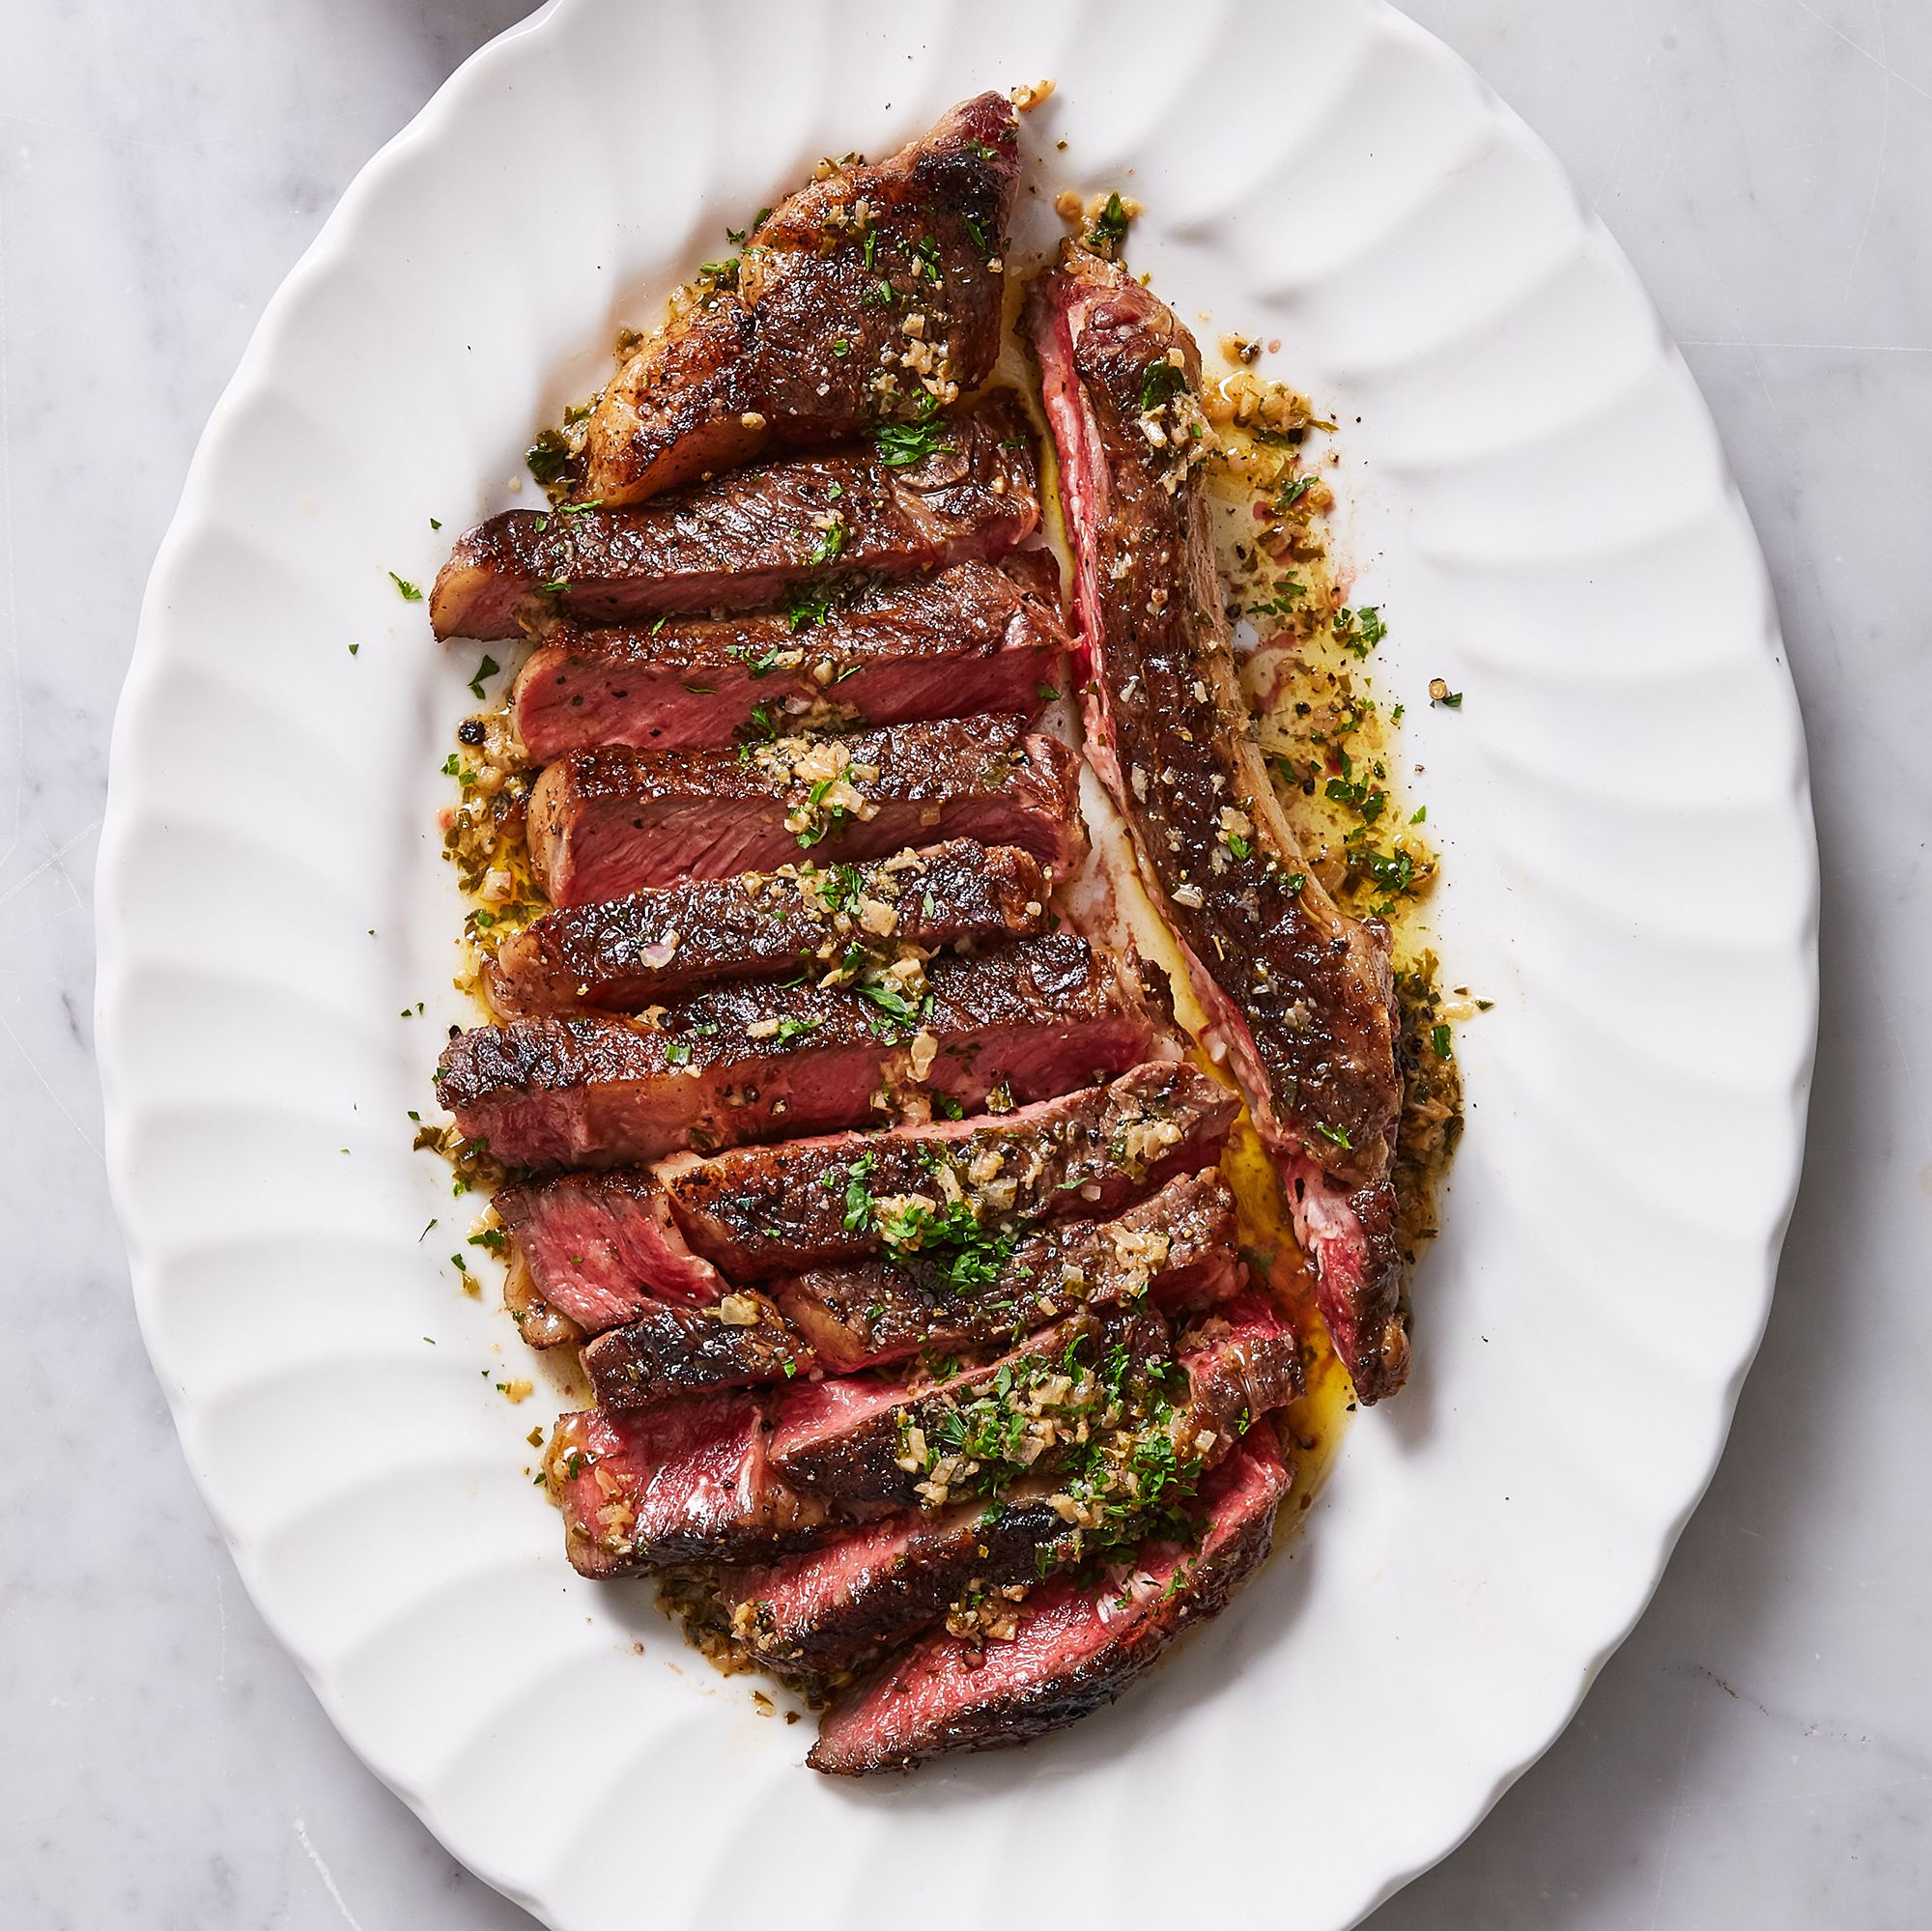 Our Most Essential Tips For Grilling Steak (Hint: You Need Way More Salt Than You Think)